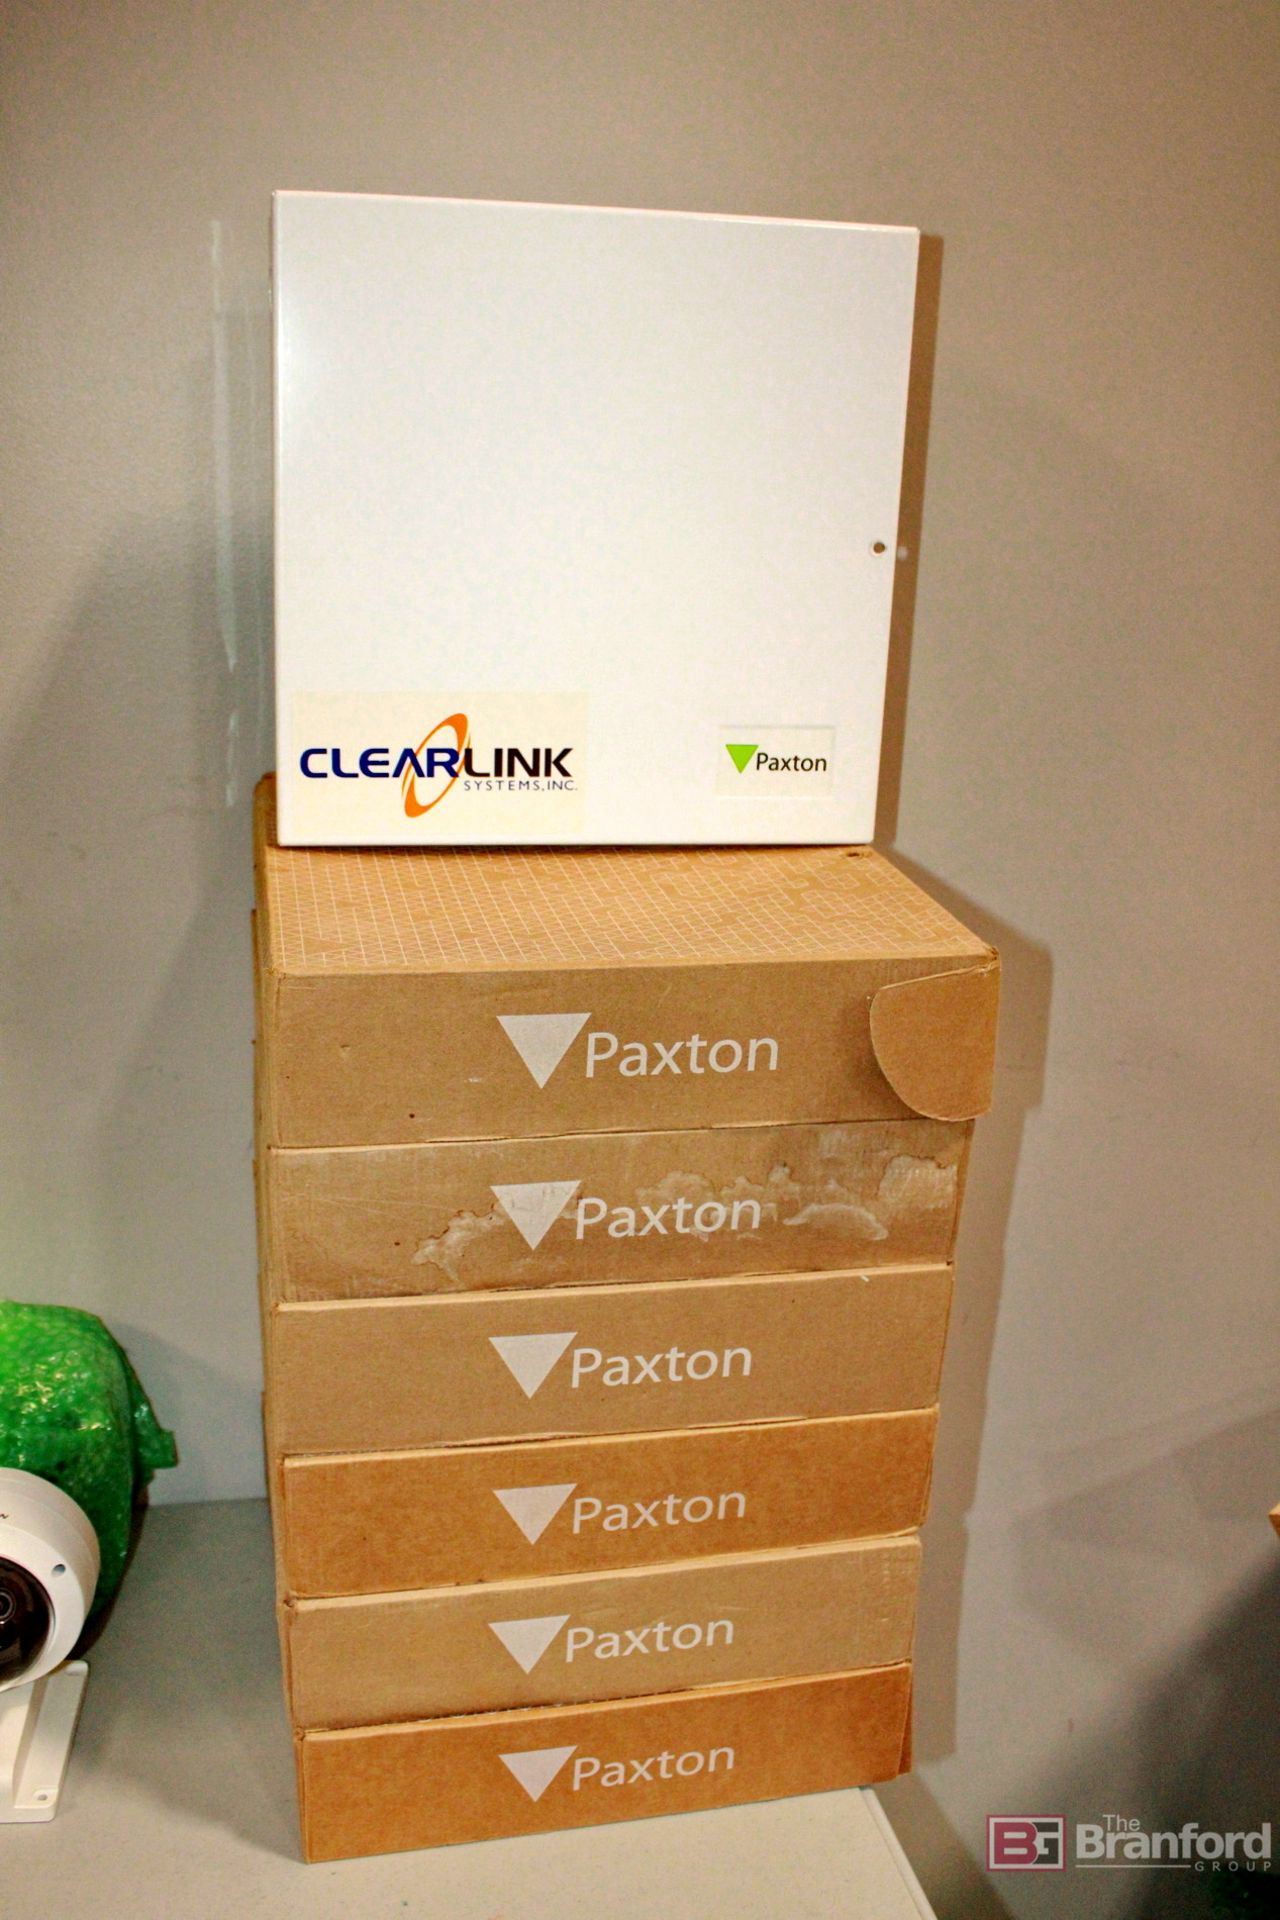 (7) Paxton ClearLink Control Boxes